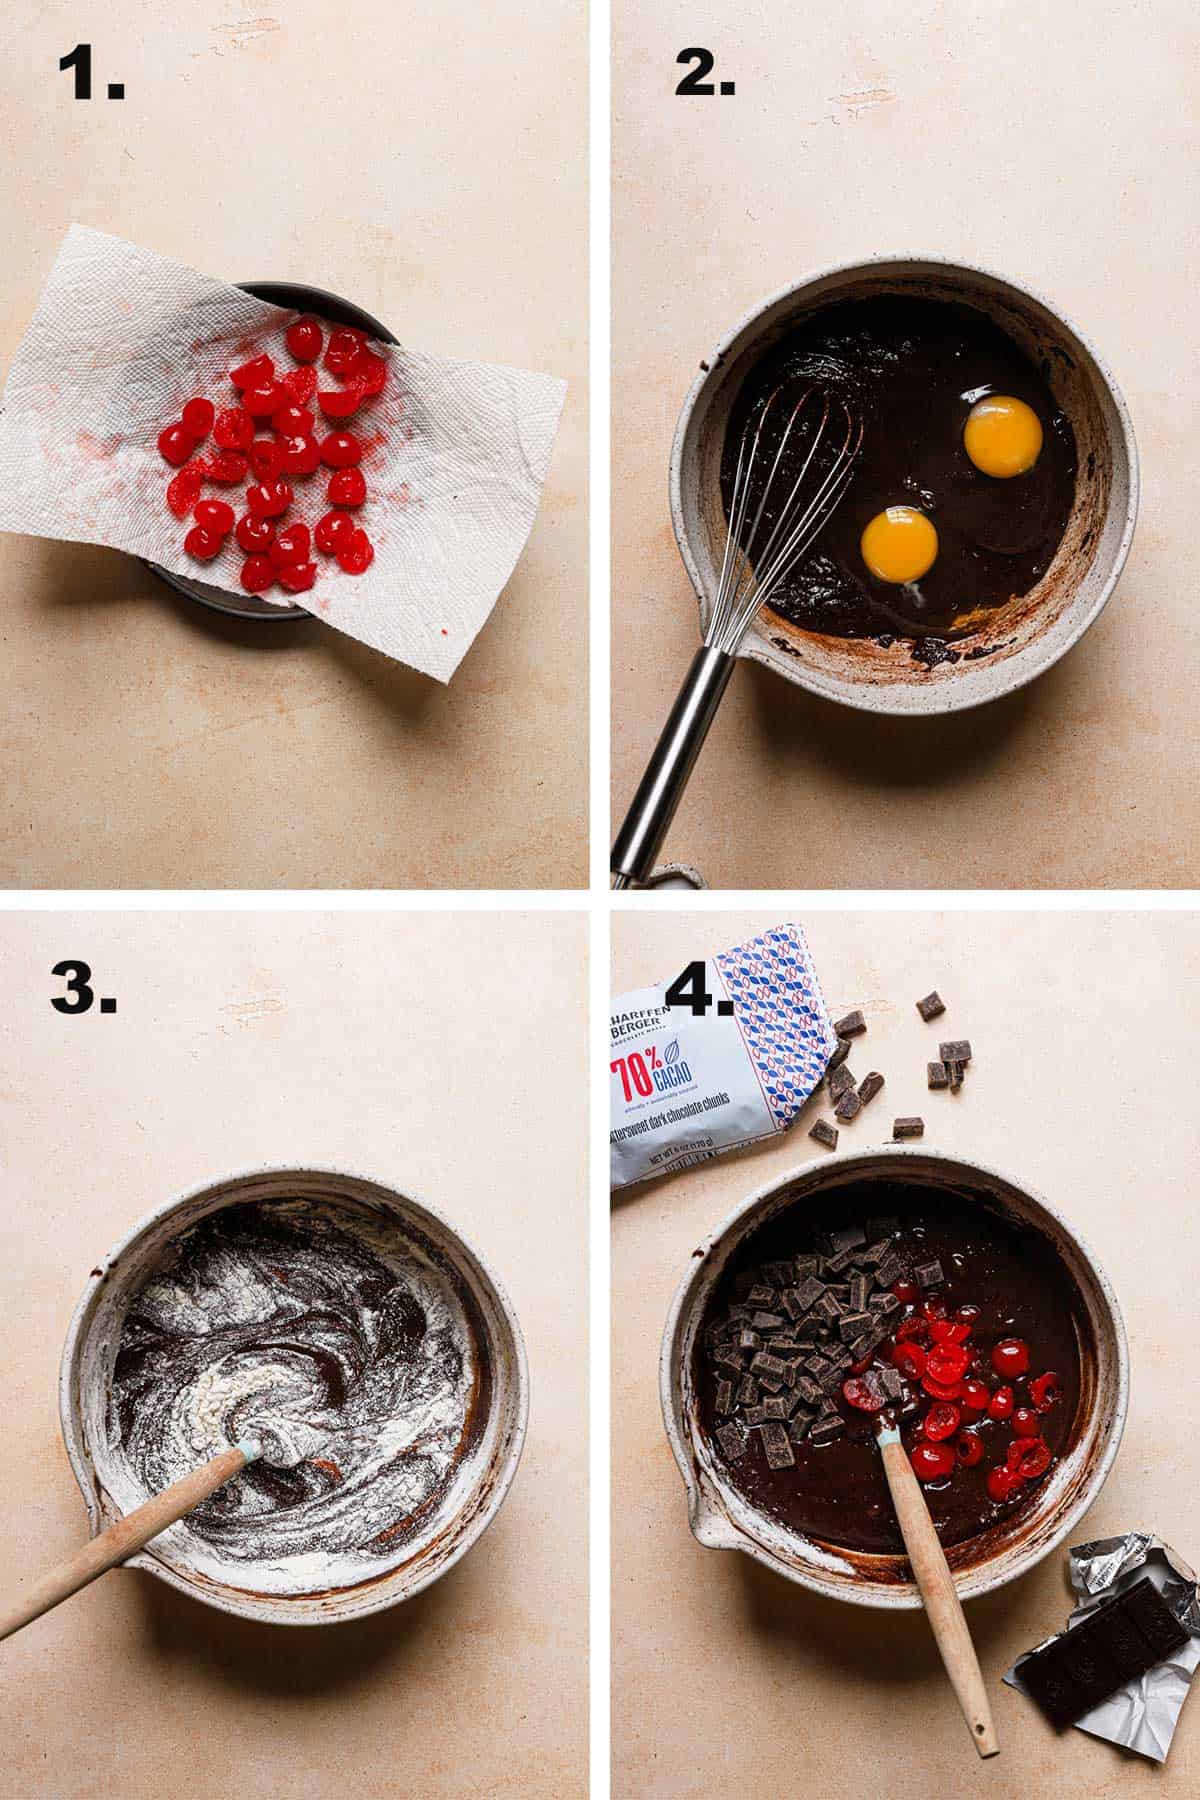 Step by step how to make brownies with cherries.